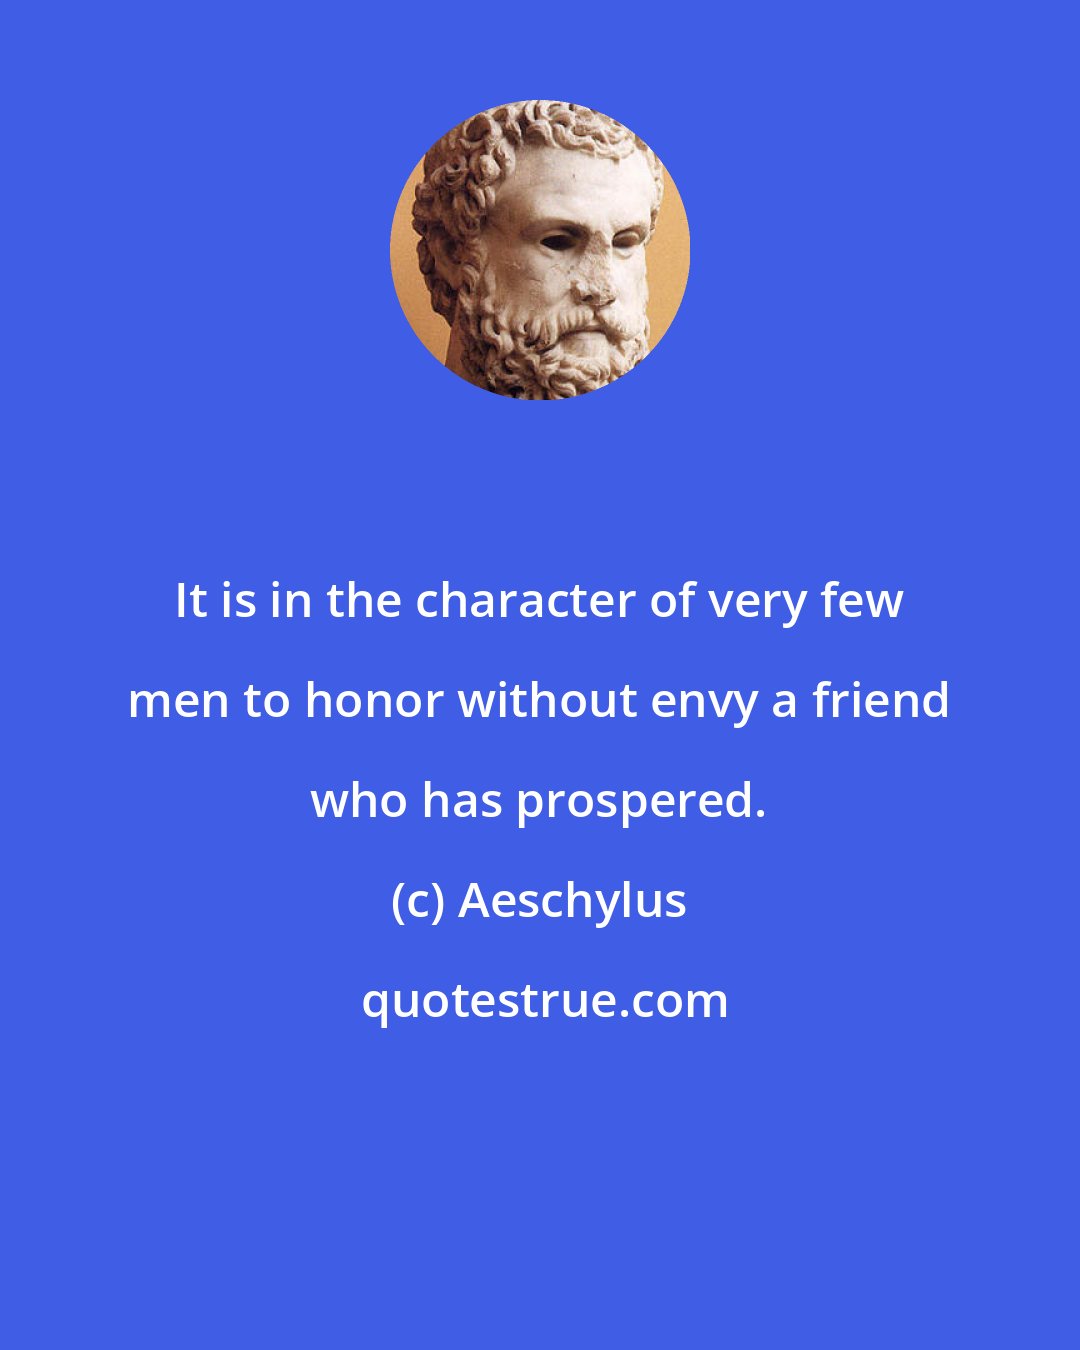 Aeschylus: It is in the character of very few men to honor without envy a friend who has prospered.